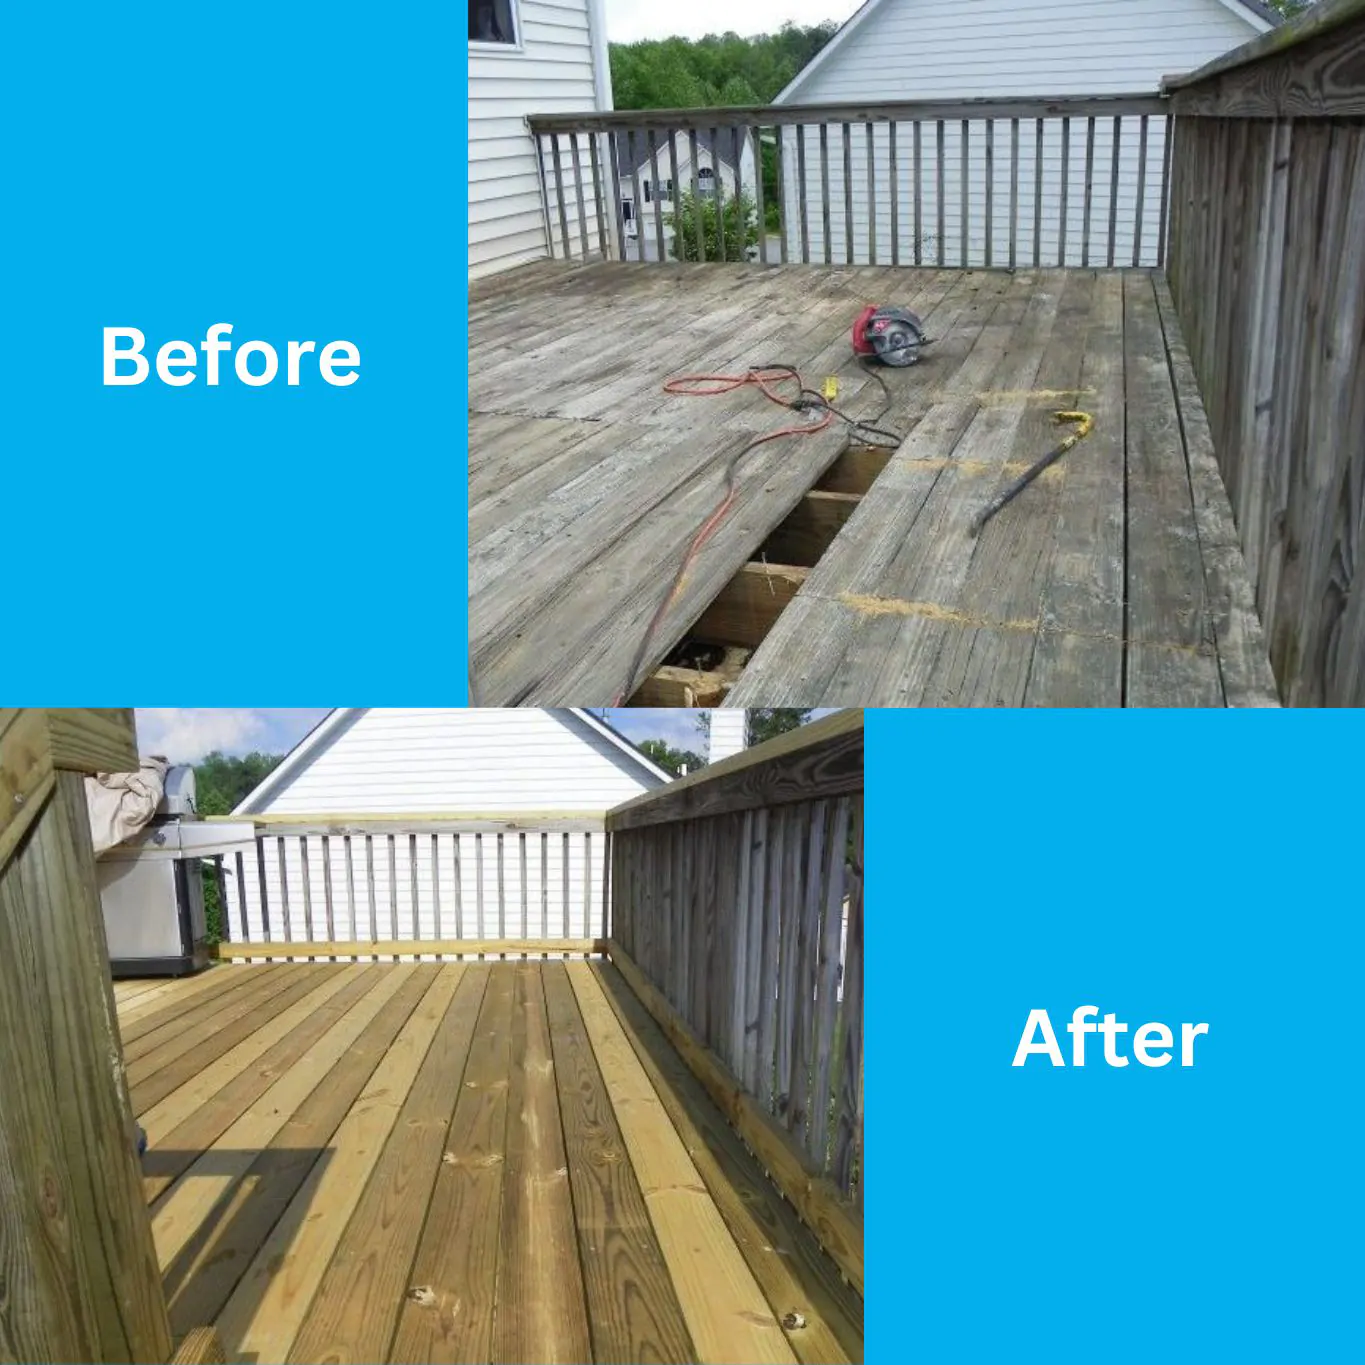 Before and After Deck Repair Services - All Pro Cape May Deck Builders